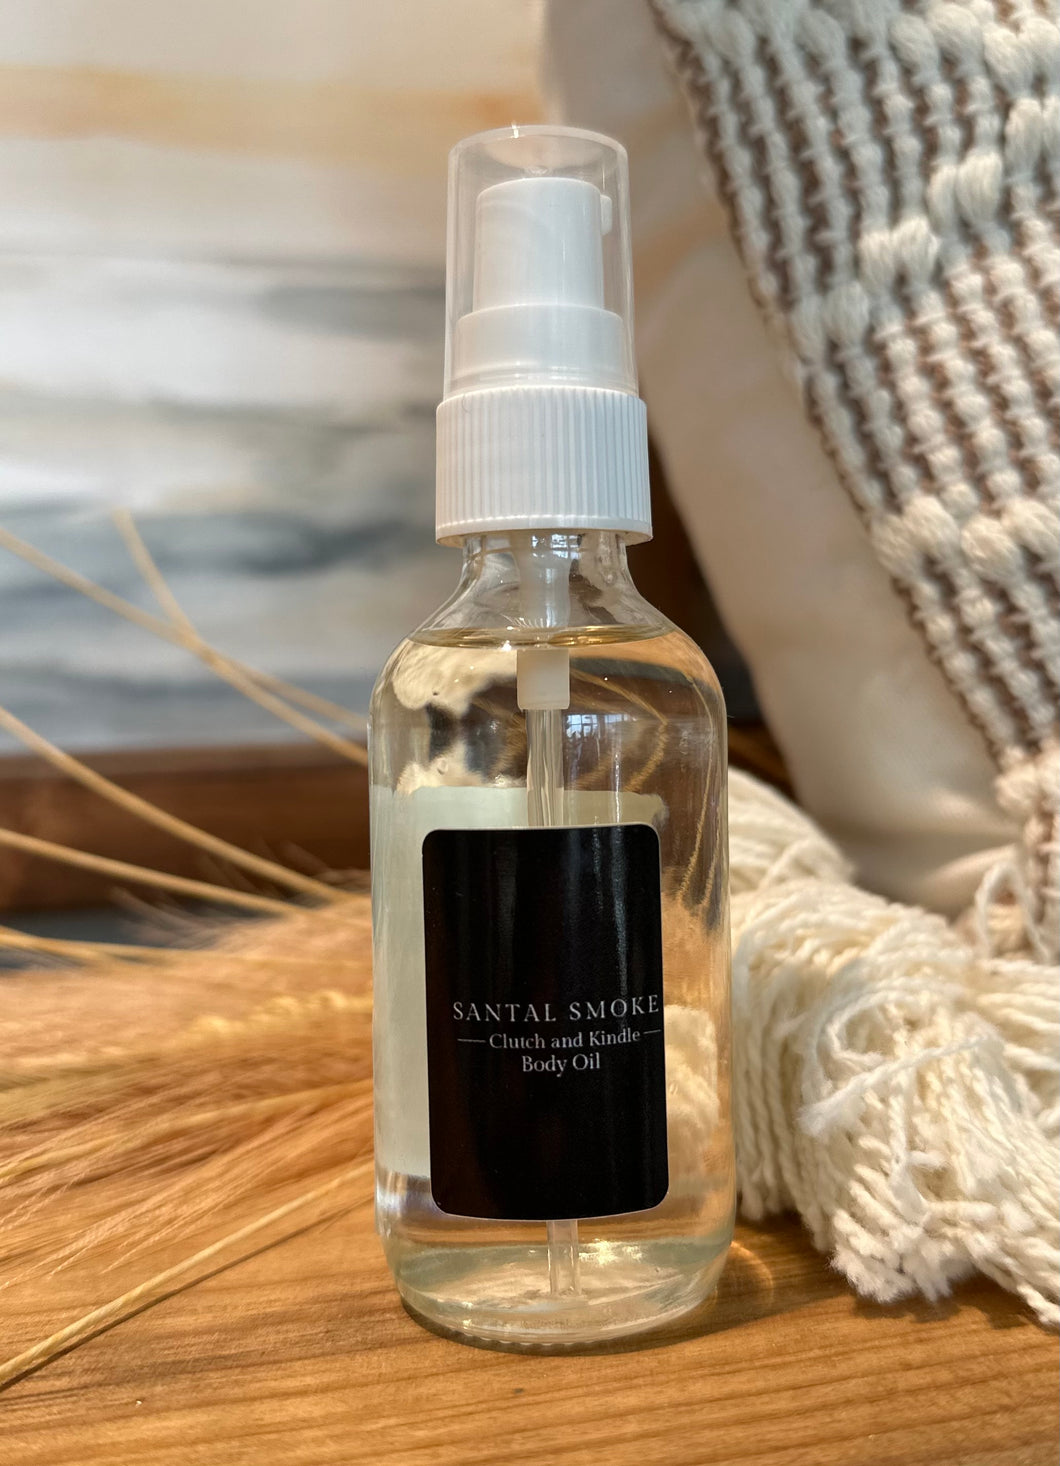 This all natural body oil in SANTAL SMOKE has hints of leather, smoke, musk and tonka beans, which gives it a masculine scent. 